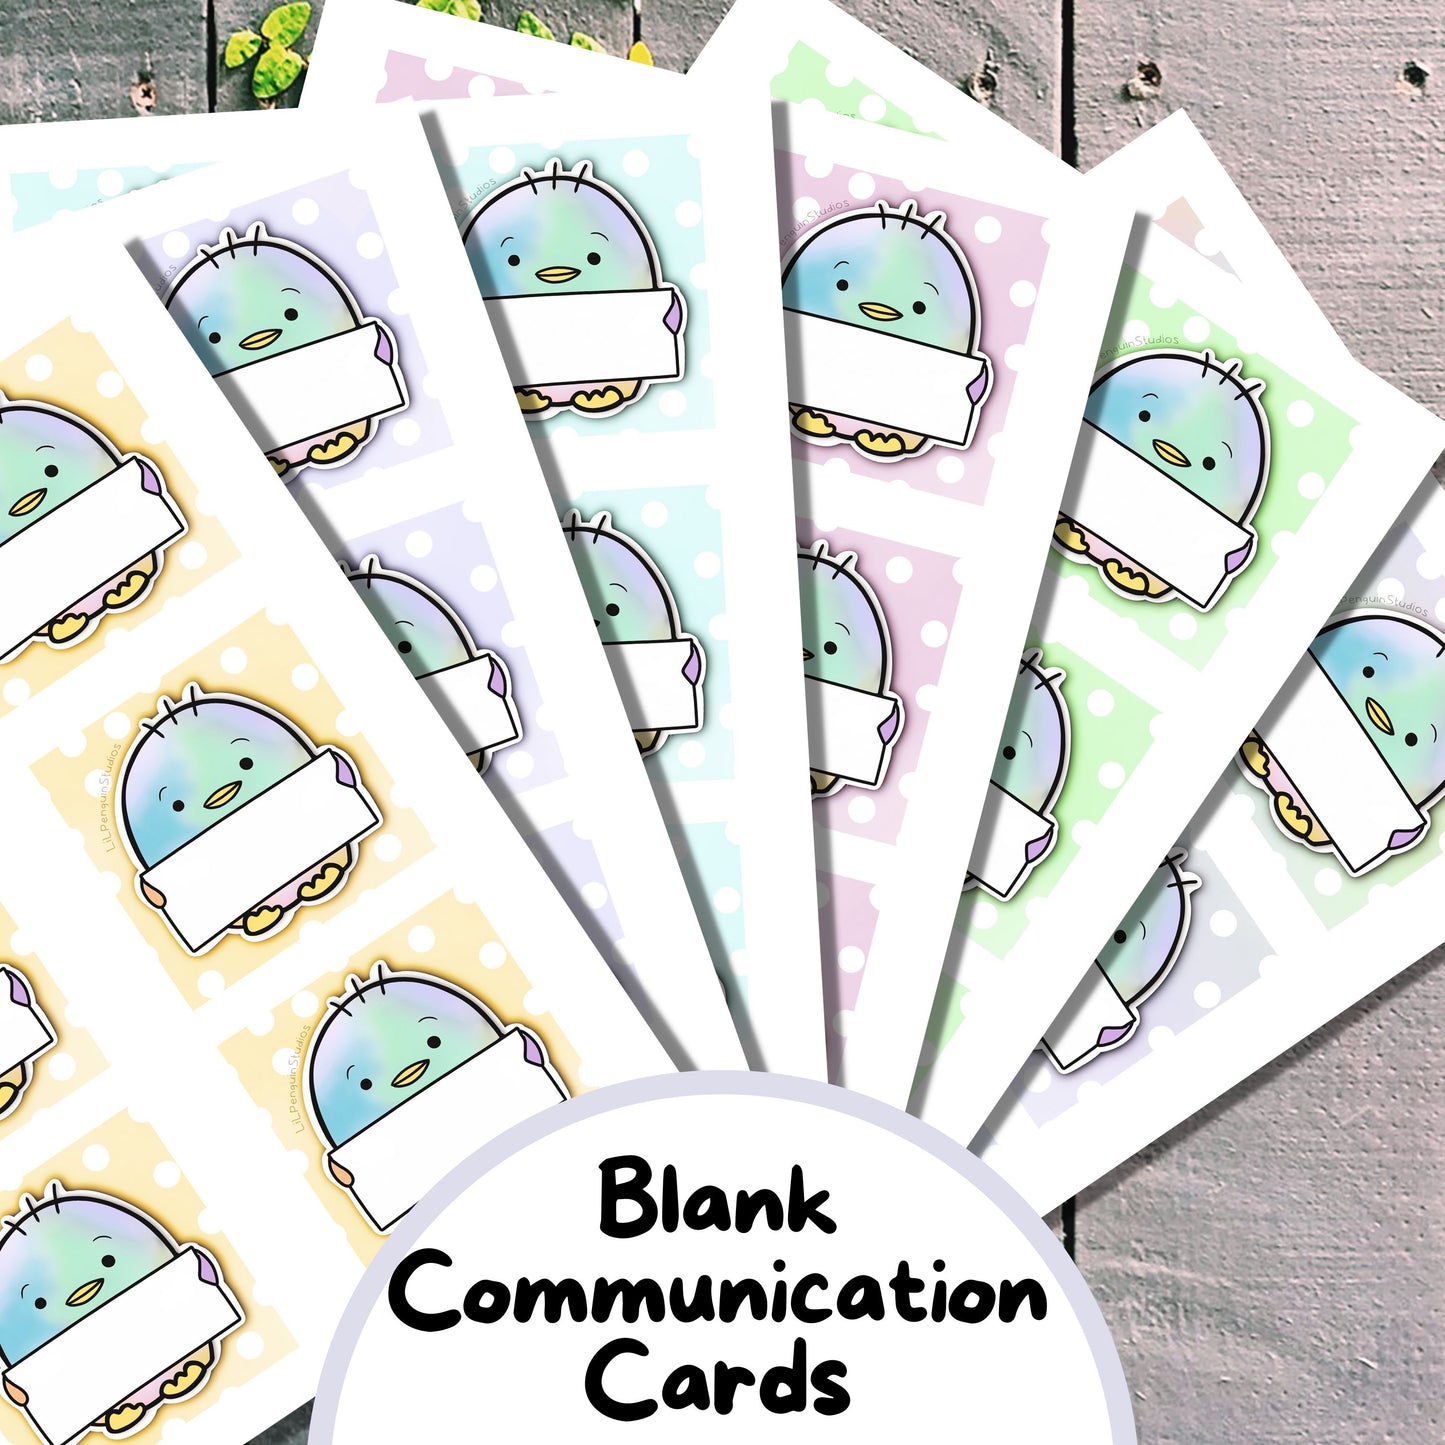 Blank communication cards (digital download only).